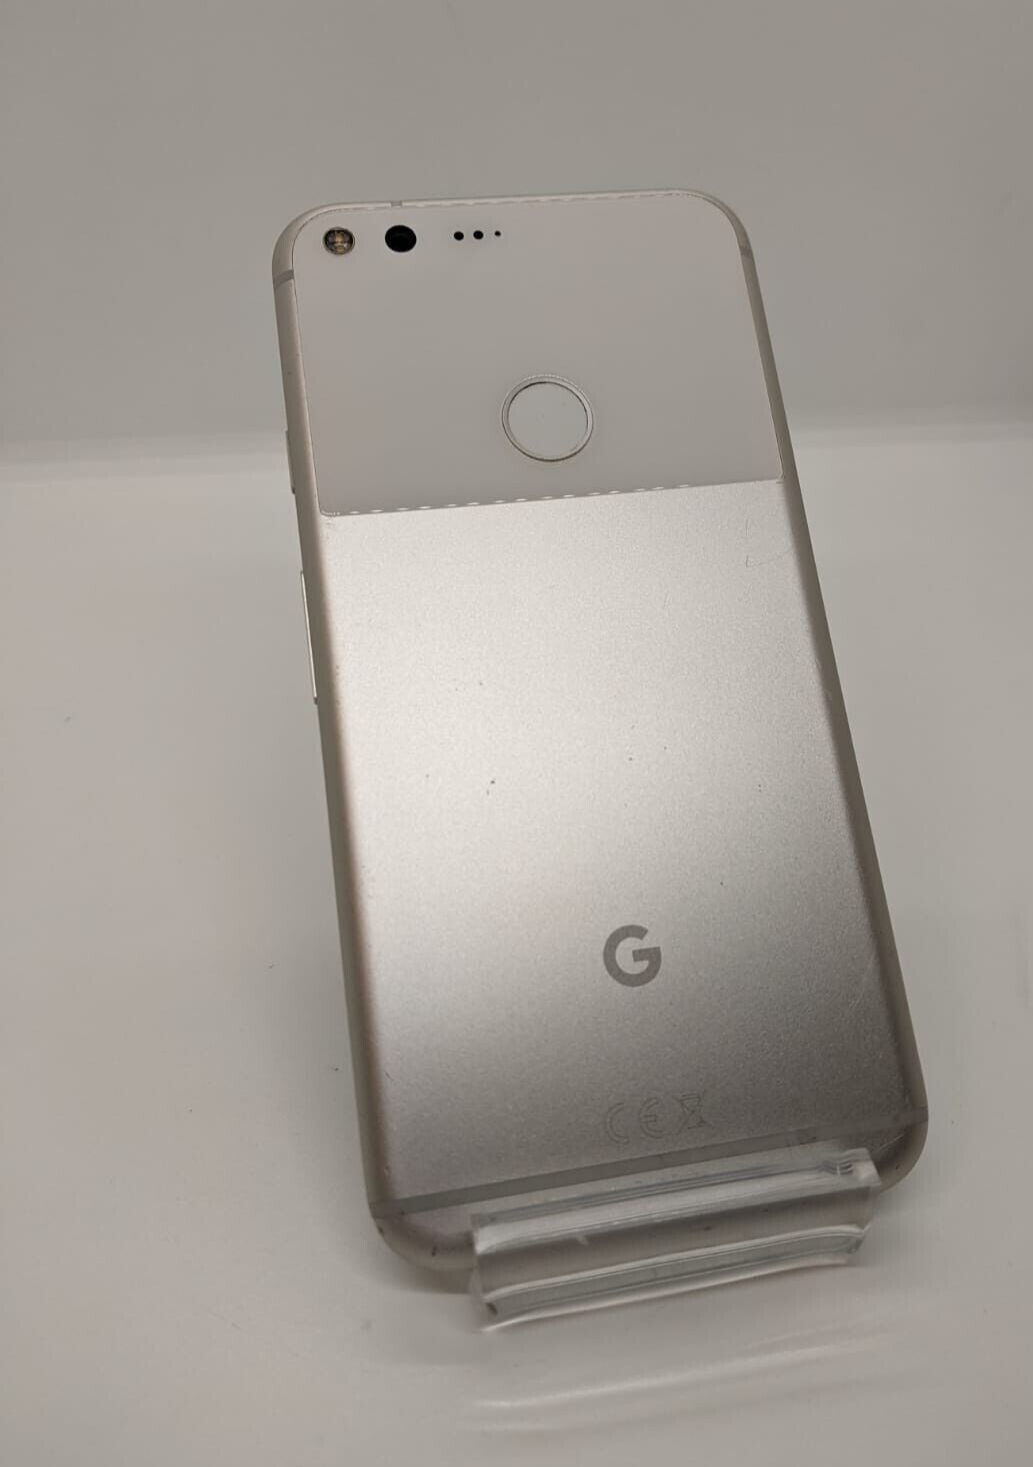 Google Pixel XL 128GB Unlocked Smartphone 2PW2100 Silver FOR PARTS WORKING